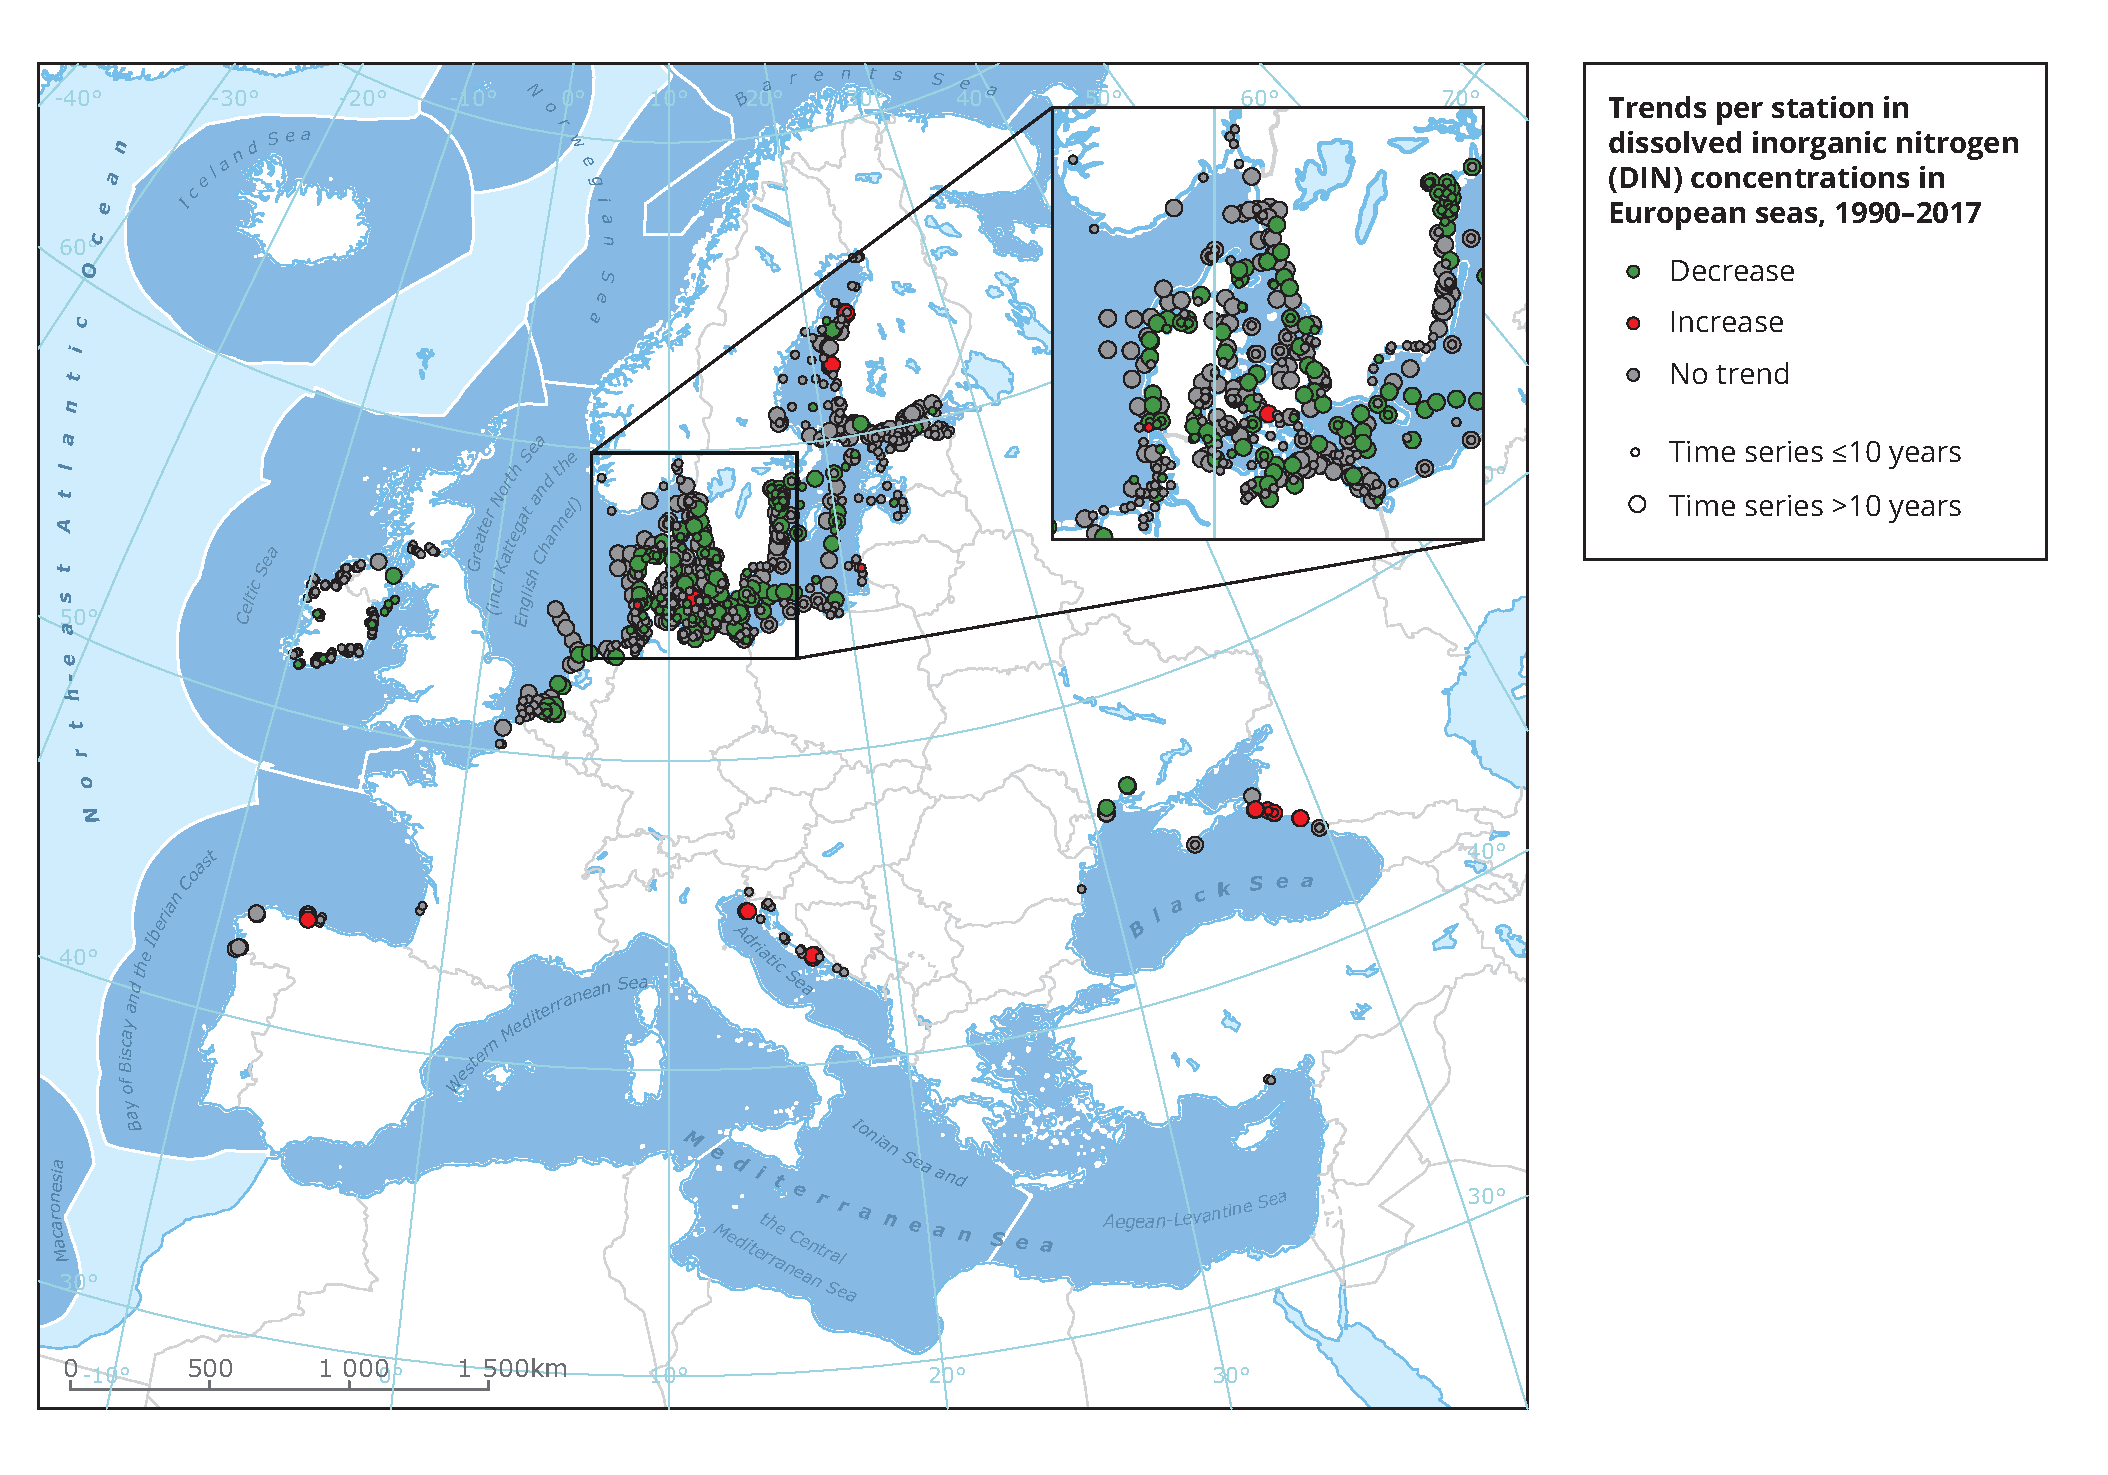 Trends in winter mean dissolved inorganic nitrogen concentrations in European seass